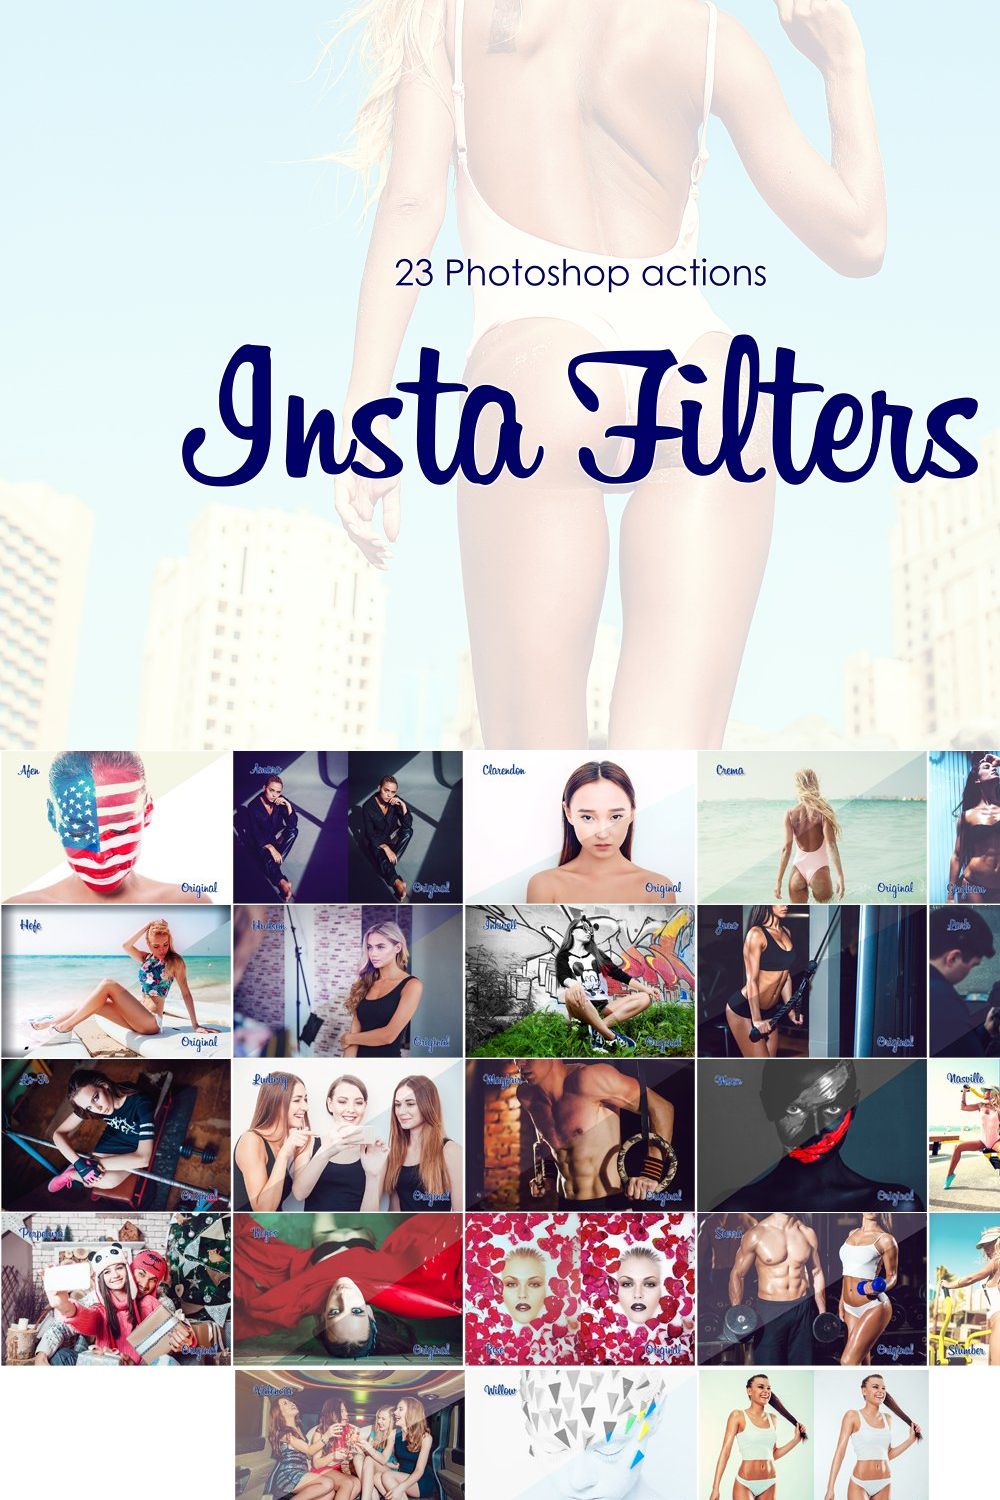 Photoshop Actions "23 InstaFilters" pinterest preview image.